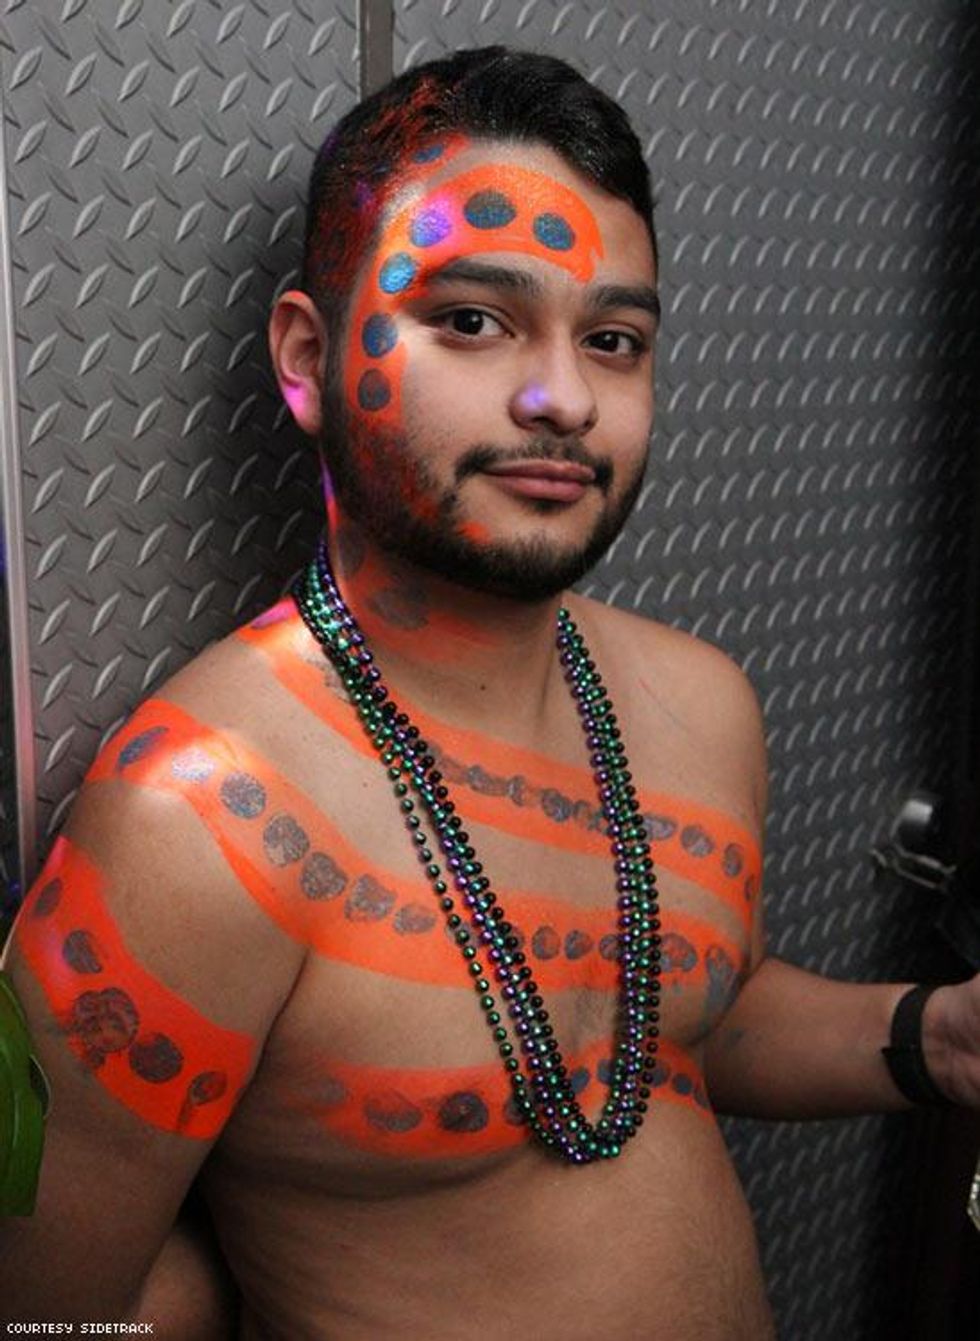 86 Pics Of Guys Stripped And Showing It Off For Mardi Gras In Chicago 4258